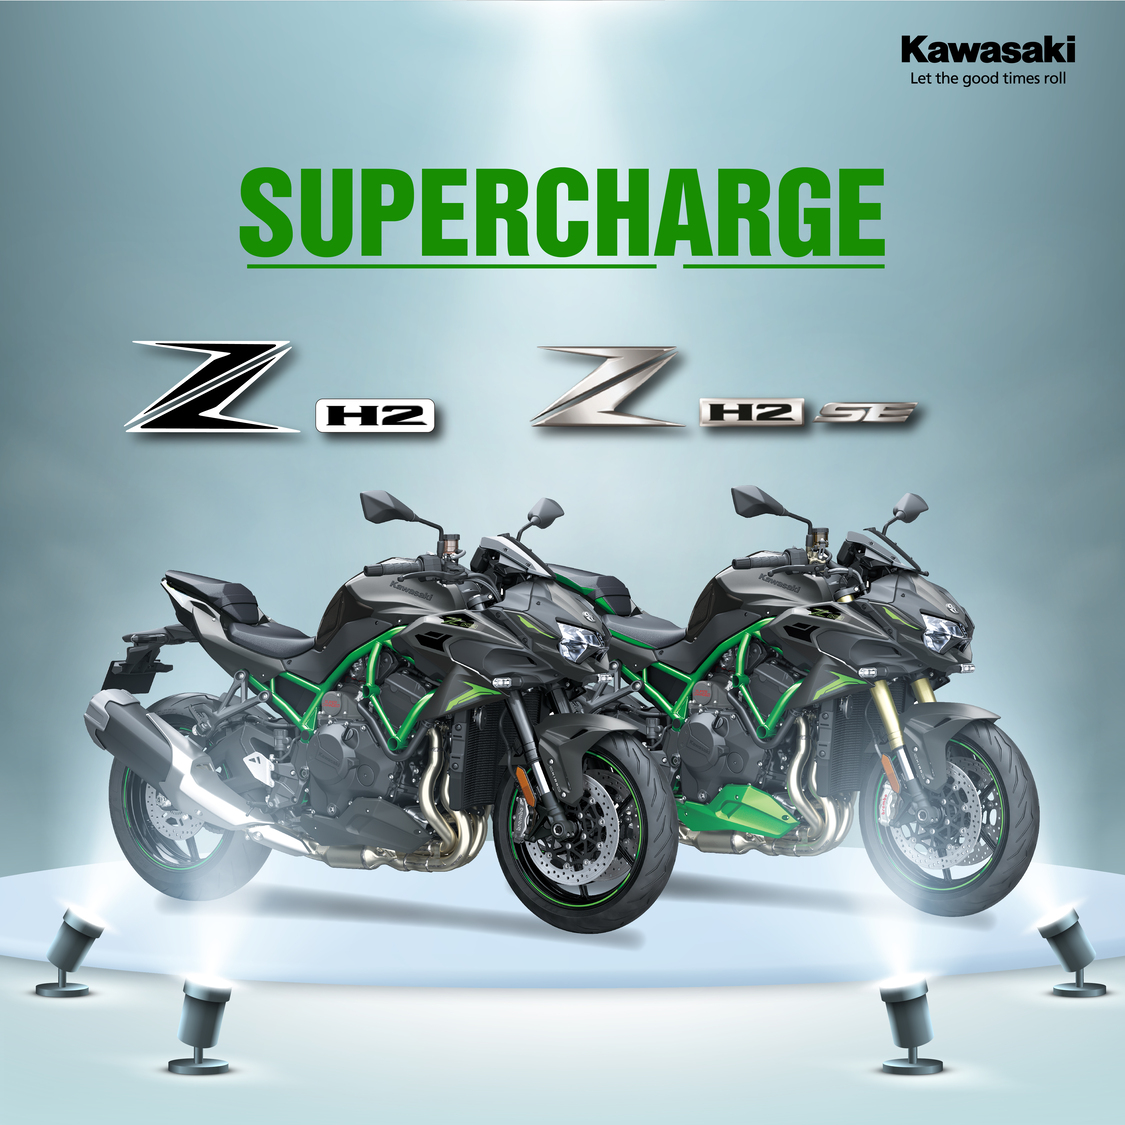 2023 Kawasaki Z H2 Supercharged Motorcycles Launched in India - picture